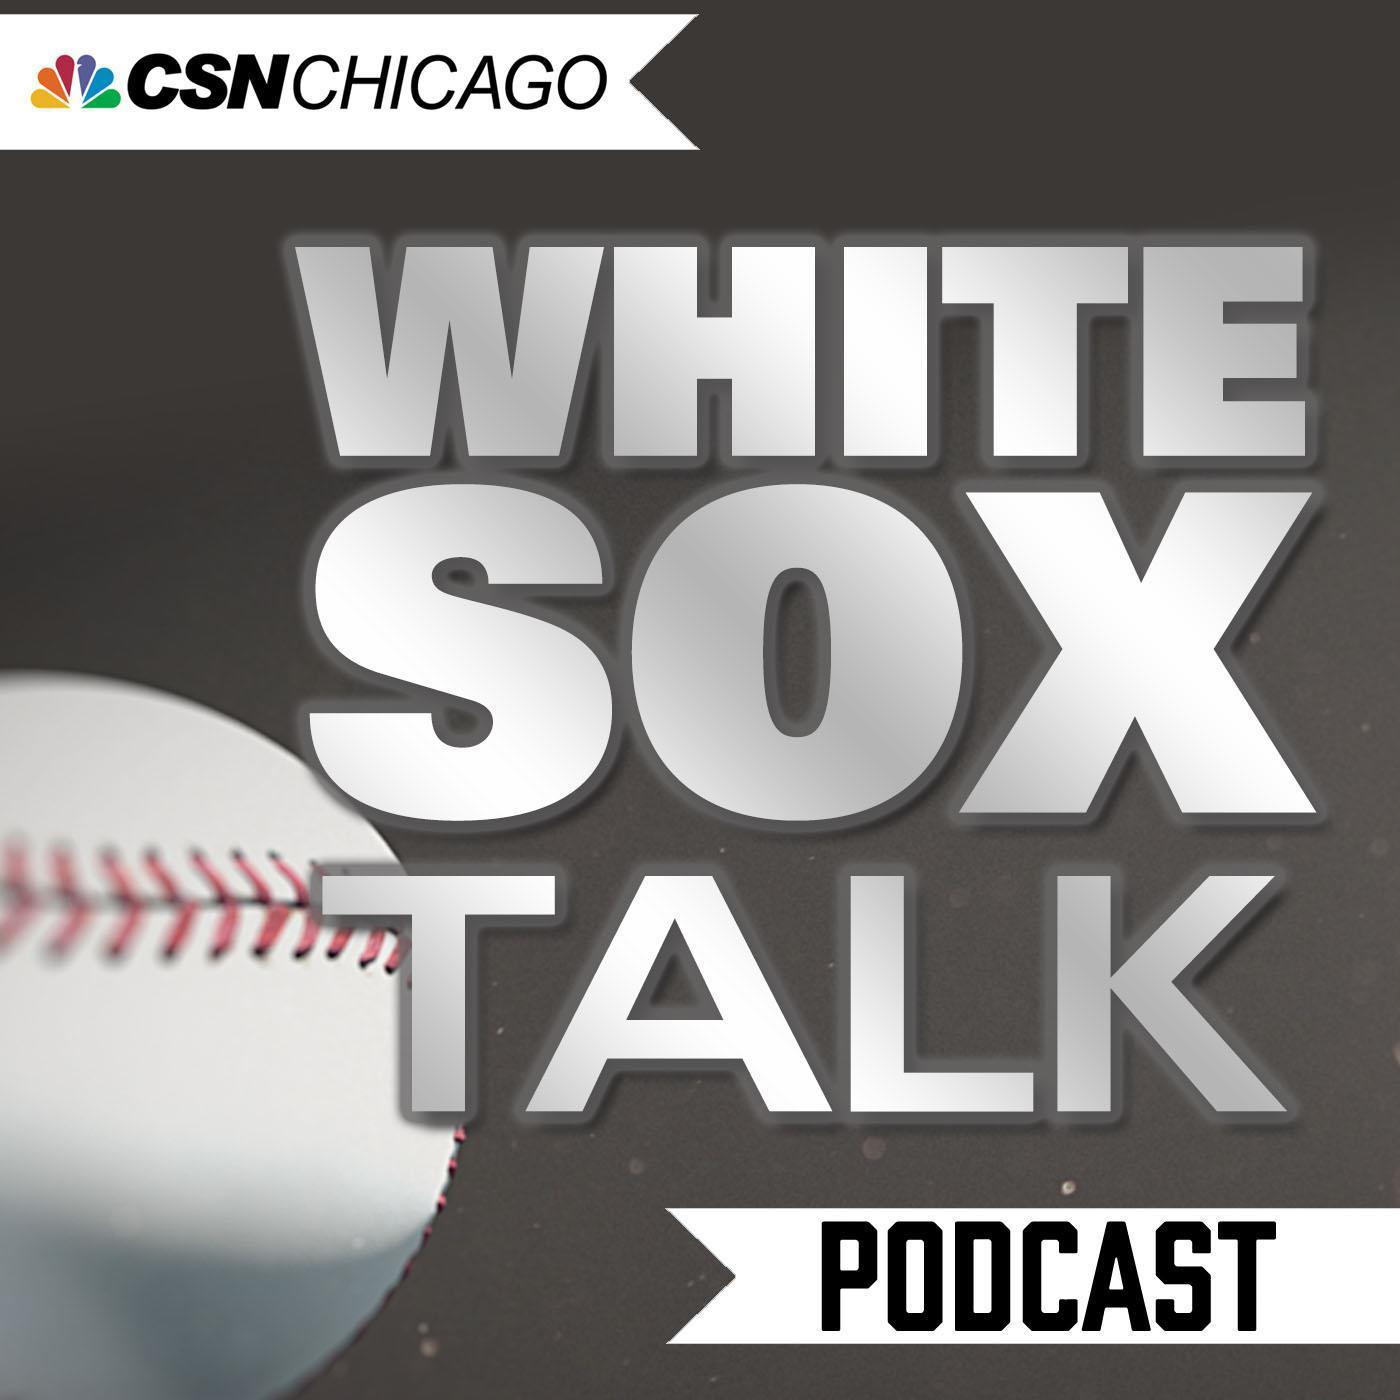 Ep. 20: Todd Frazier, Jose Quintana discuss their futures with the White Sox